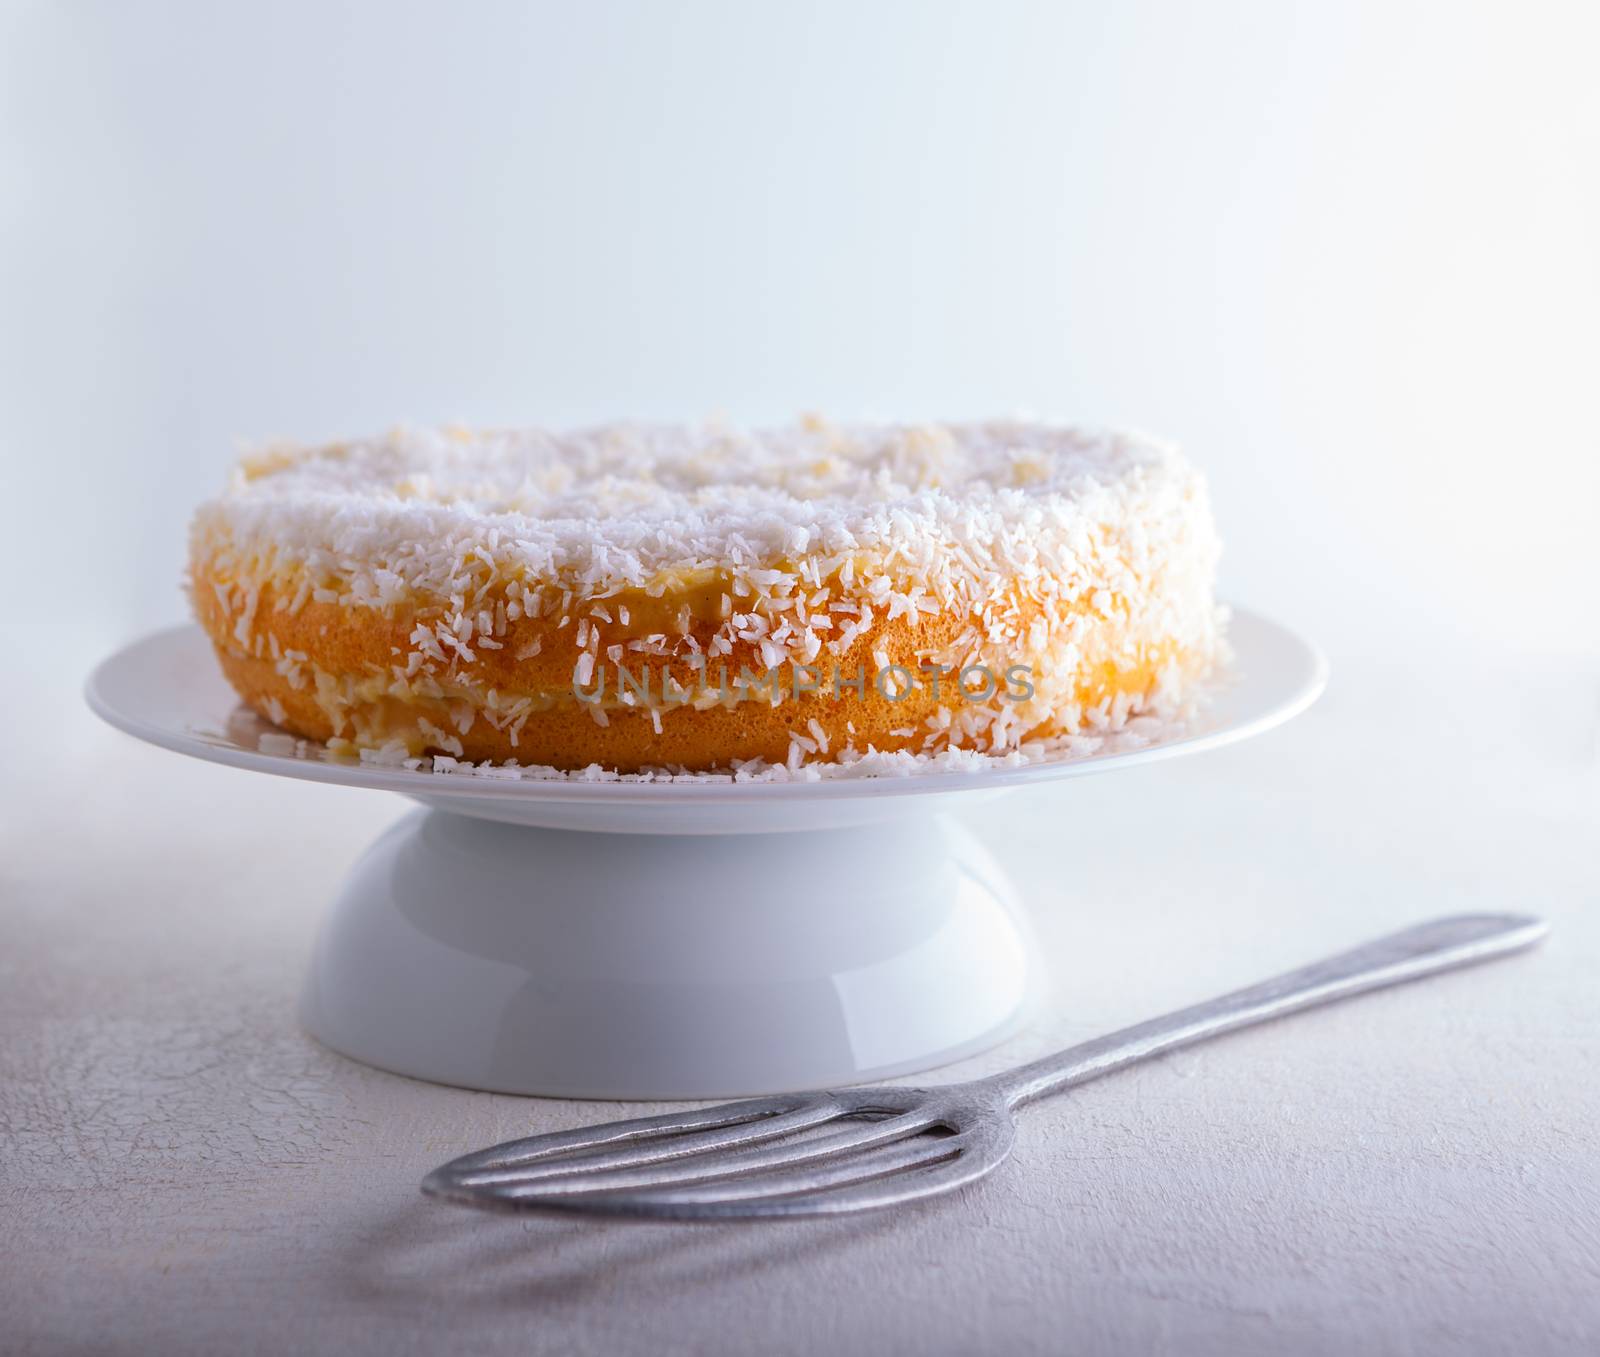 Slice of Homemade coconut cake by supercat67